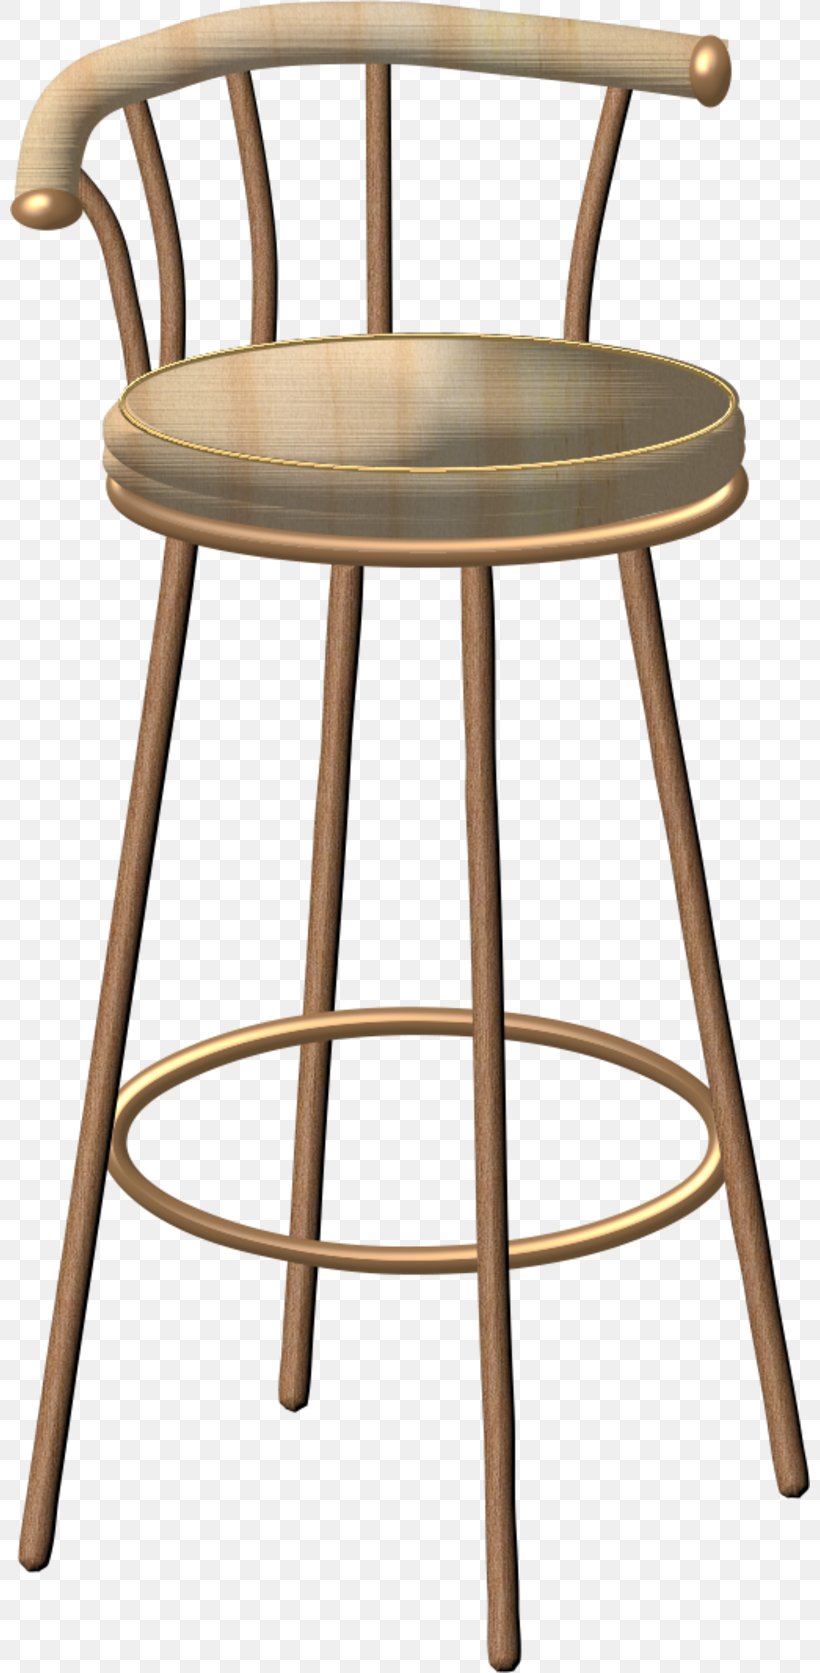 Bar Stool Swivel Chair Seat, PNG, 800x1673px, Bar Stool, Bar, Chair, Dining Room, End Table Download Free